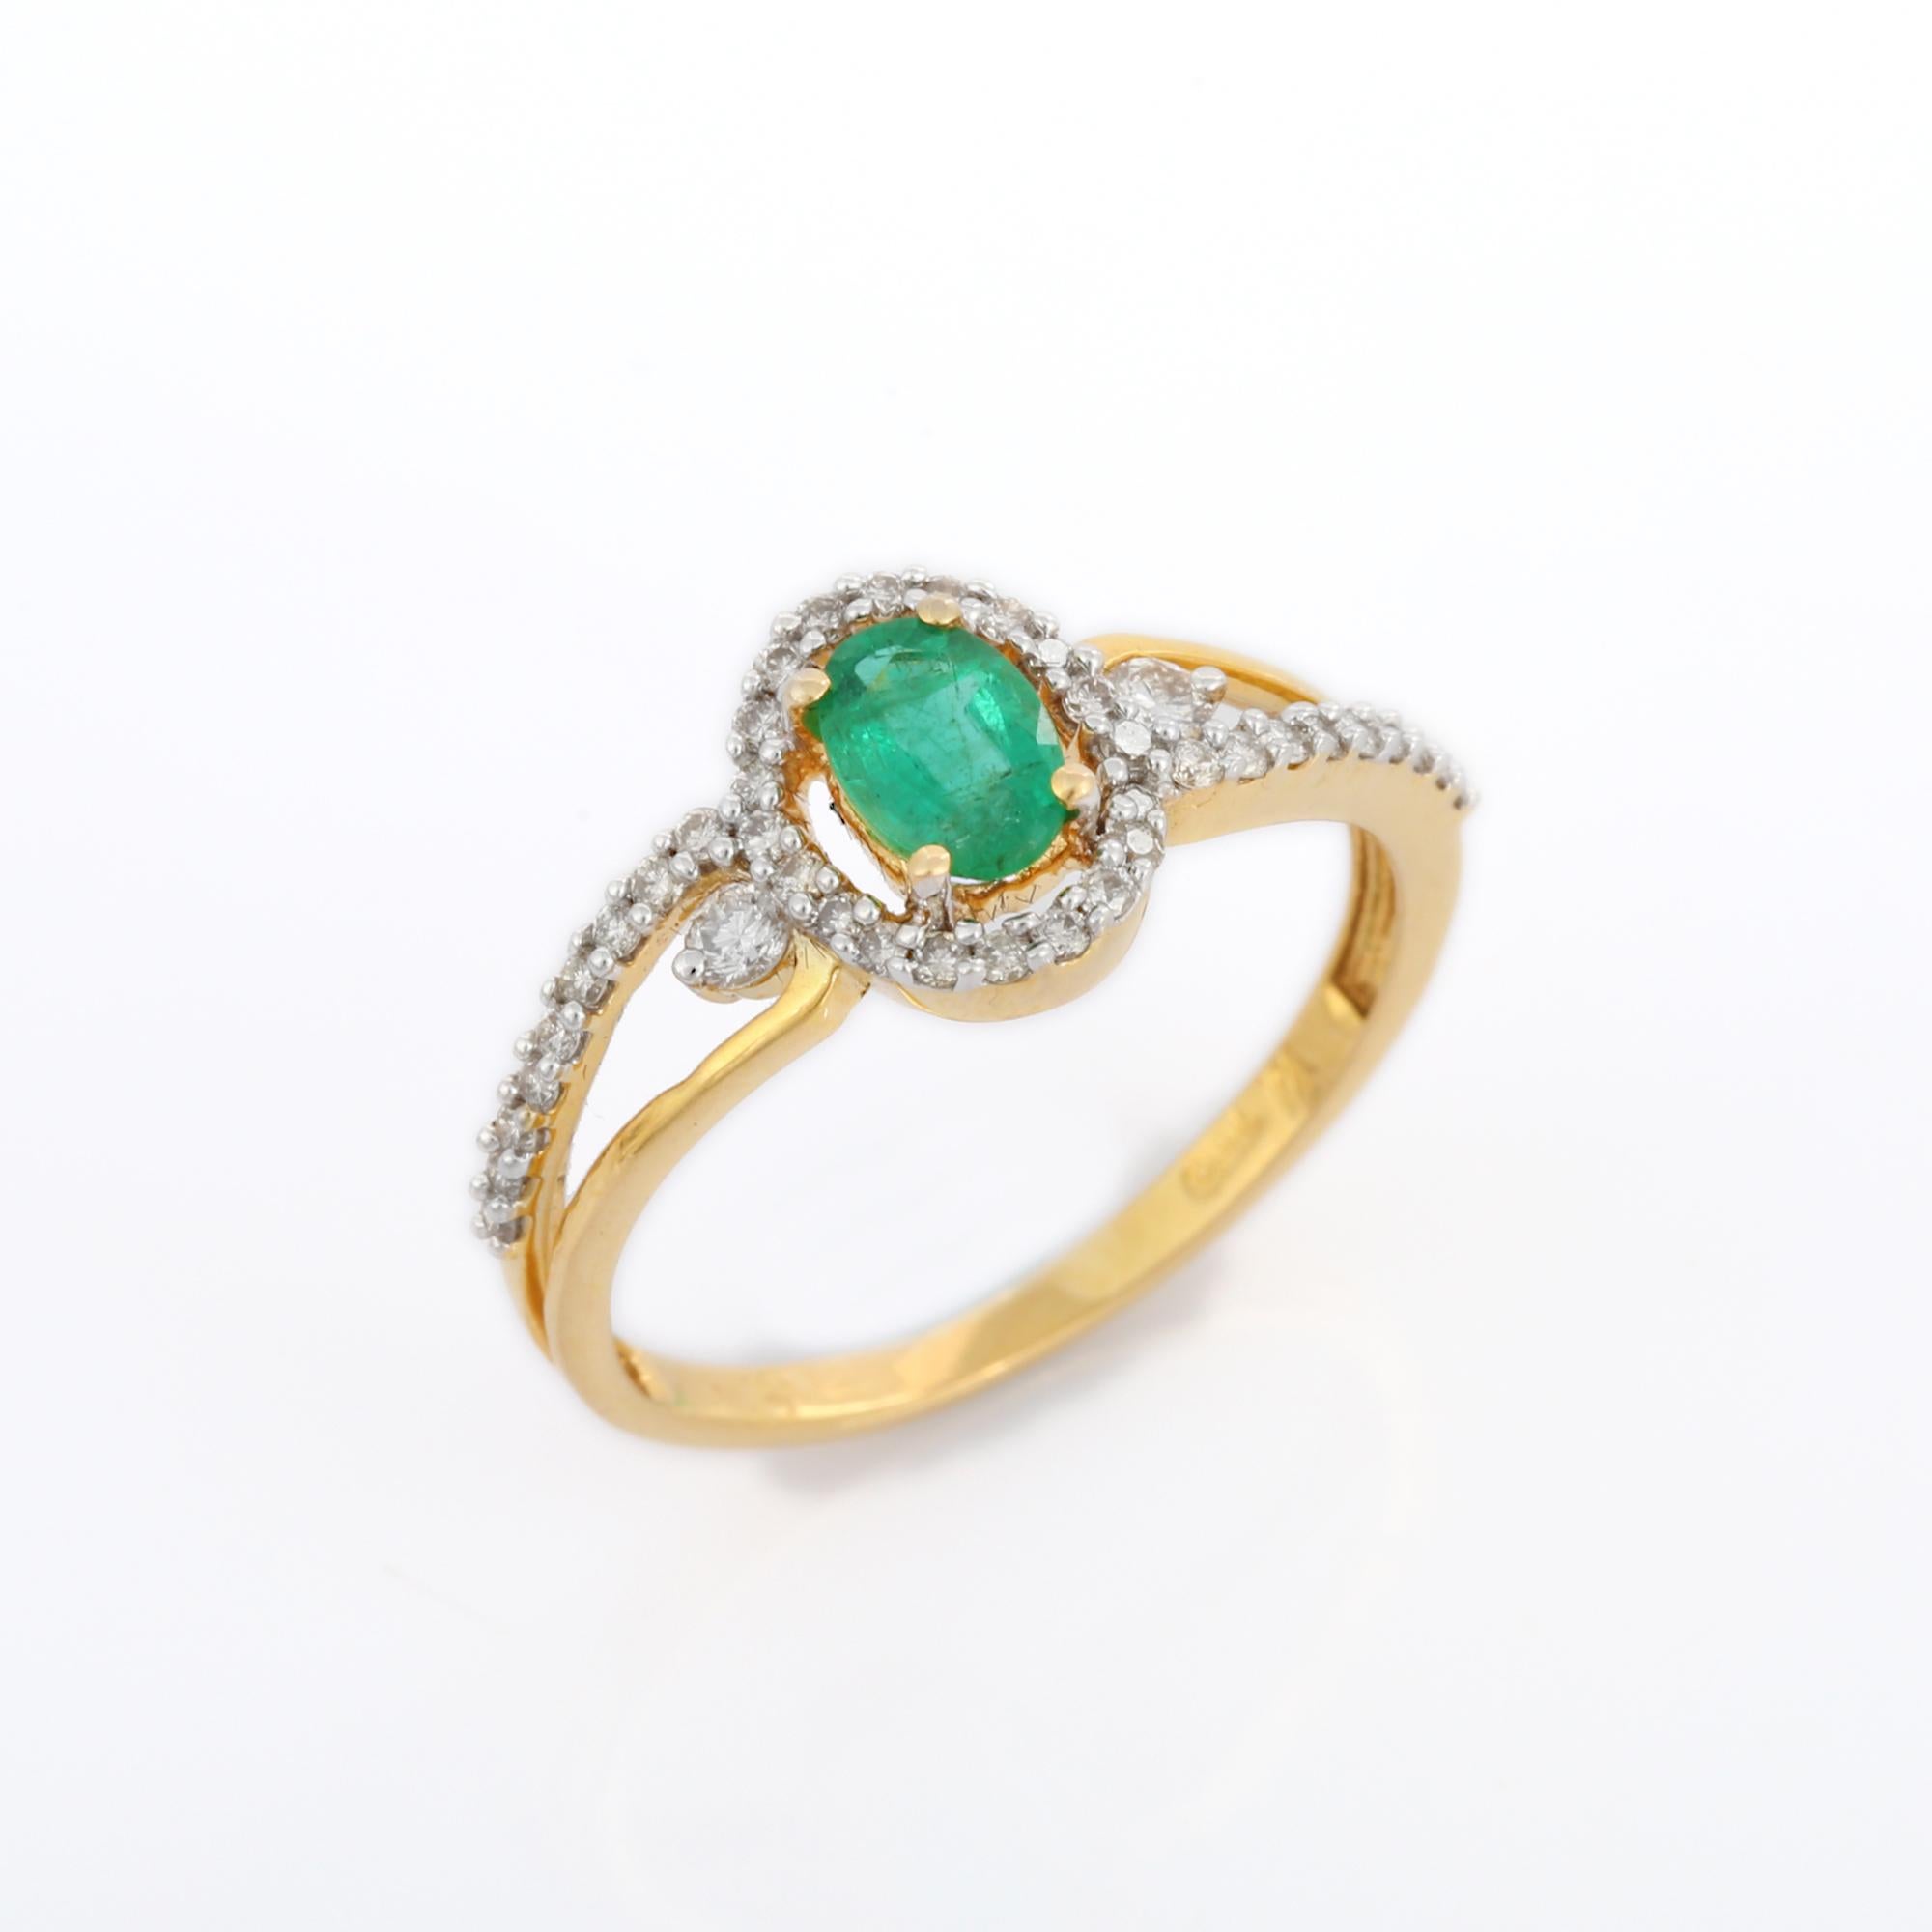 For Sale:  Solid 18k Yellow Gold Classic Emerald Engagement Ring with Diamonds 6